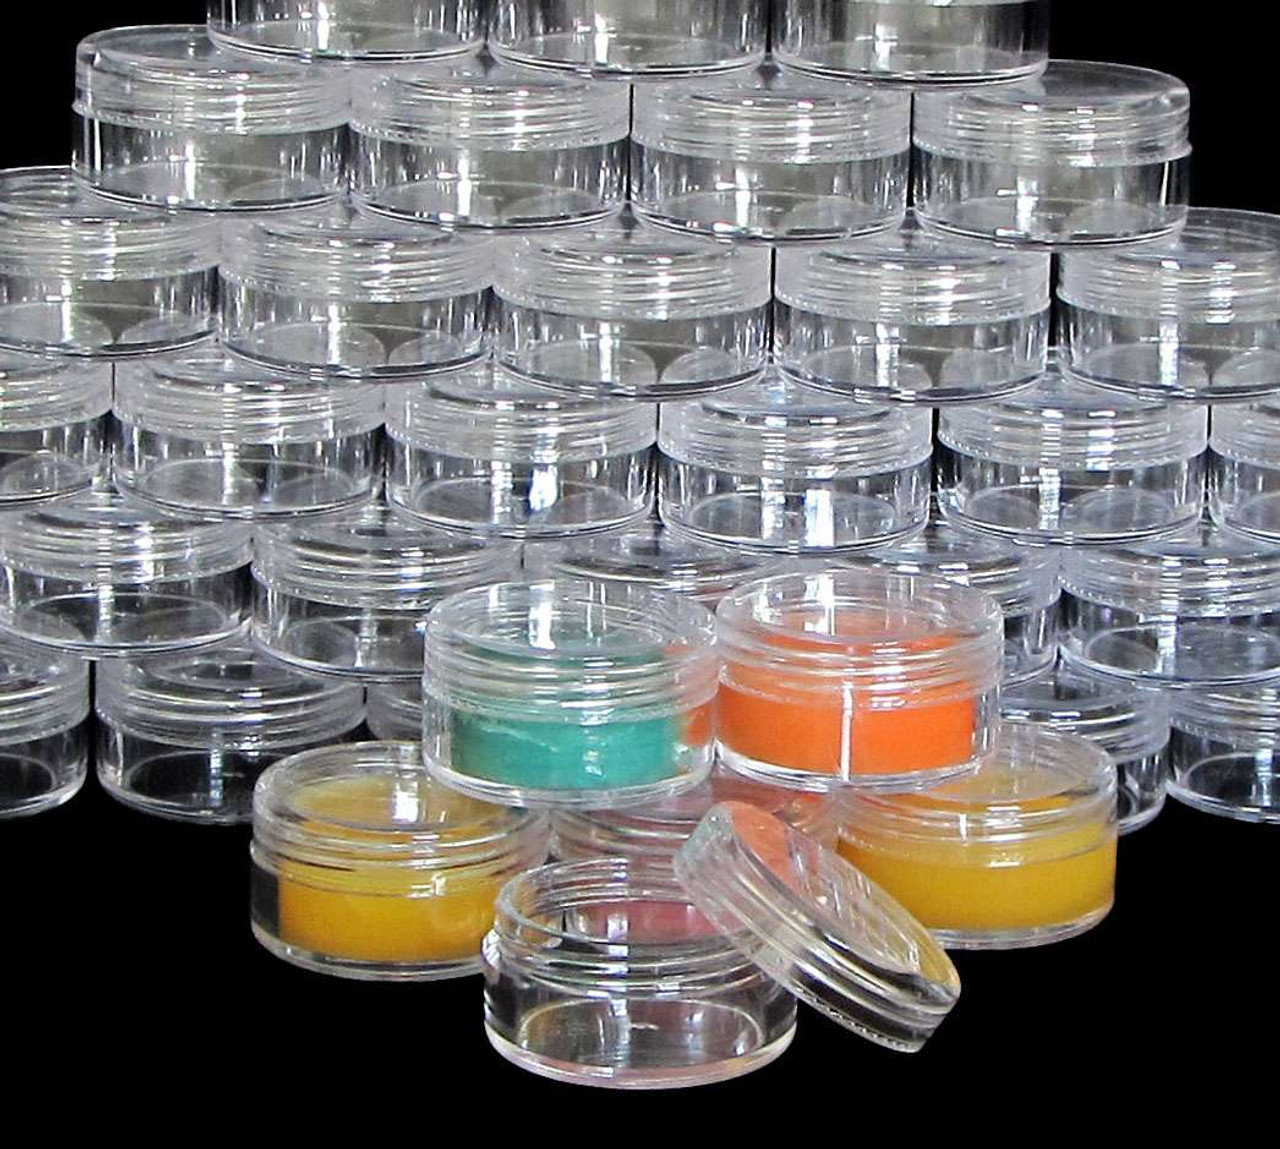 https://cdn11.bigcommerce.com/s-qd7k5gxi/images/stencil/1280x1280/products/274/6449/Cosmetic-Jars-Plastic-Beauty-Containers-10-Gram-Clear-White-Black-Lids-Beauty-Makeup-Supply_3255__39926.1661387888.jpg?c=2?imbypass=on